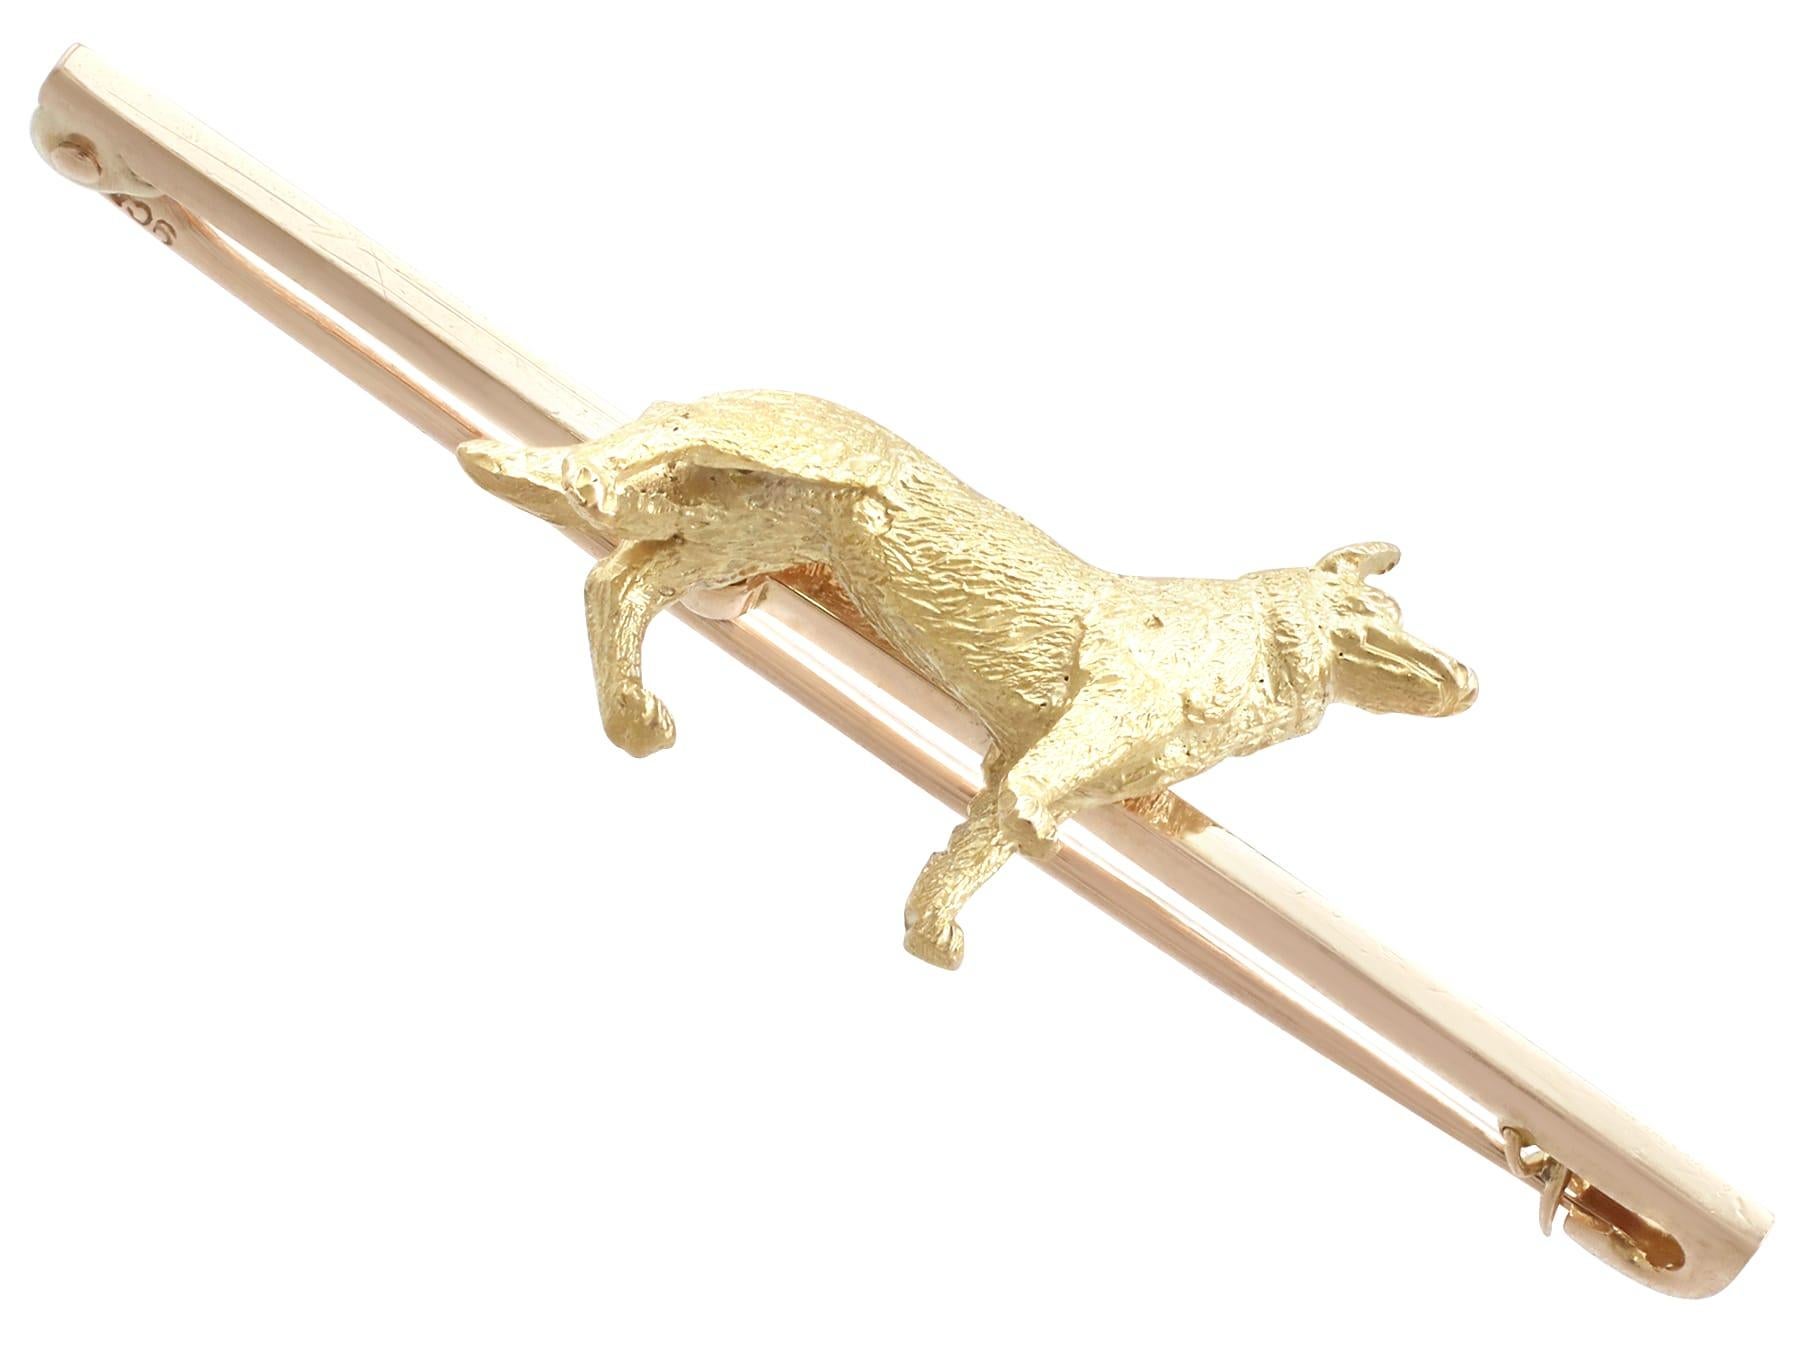 An exceptional, fine and impressive antique Victorian 18 karat yellow gold dog brooch in the form of an Alsatian; part of our antique jewelry and estate jewelry collections

This exceptional, fine and impressive antique gold dog brooch has been